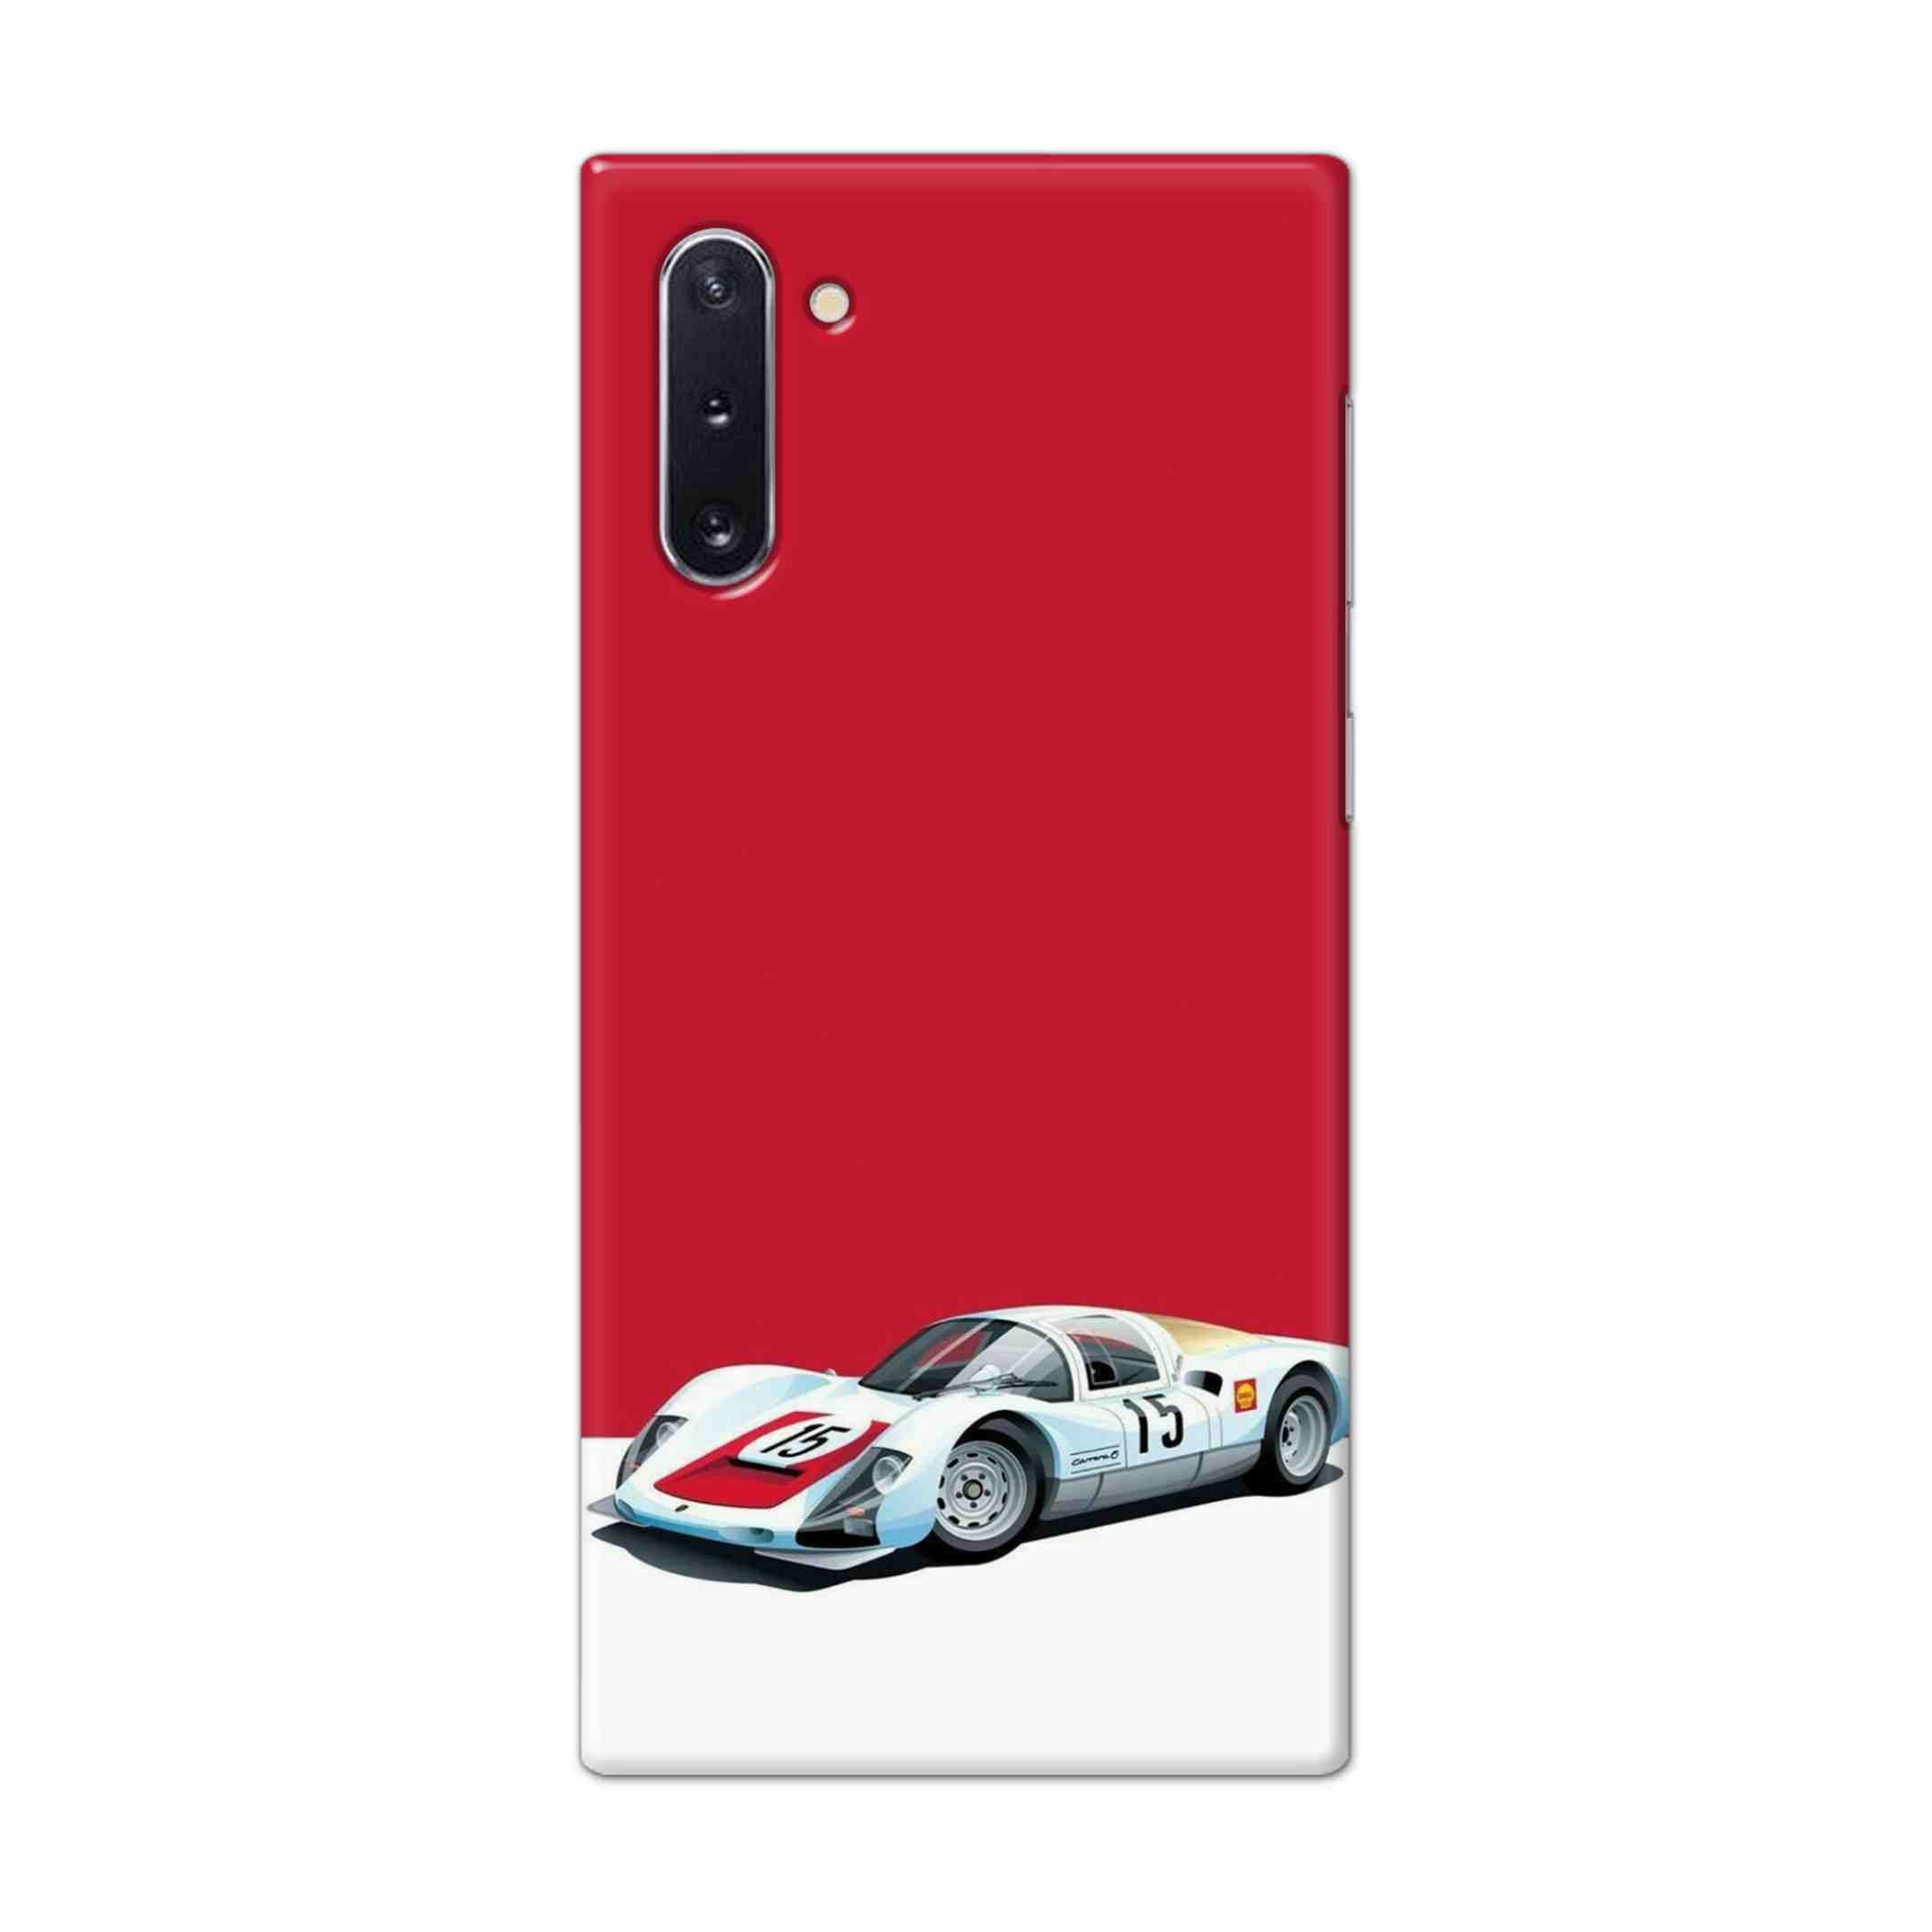 Buy Ferrari F15 Hard Back Mobile Phone Case Cover For Samsung Galaxy Note 10 Online